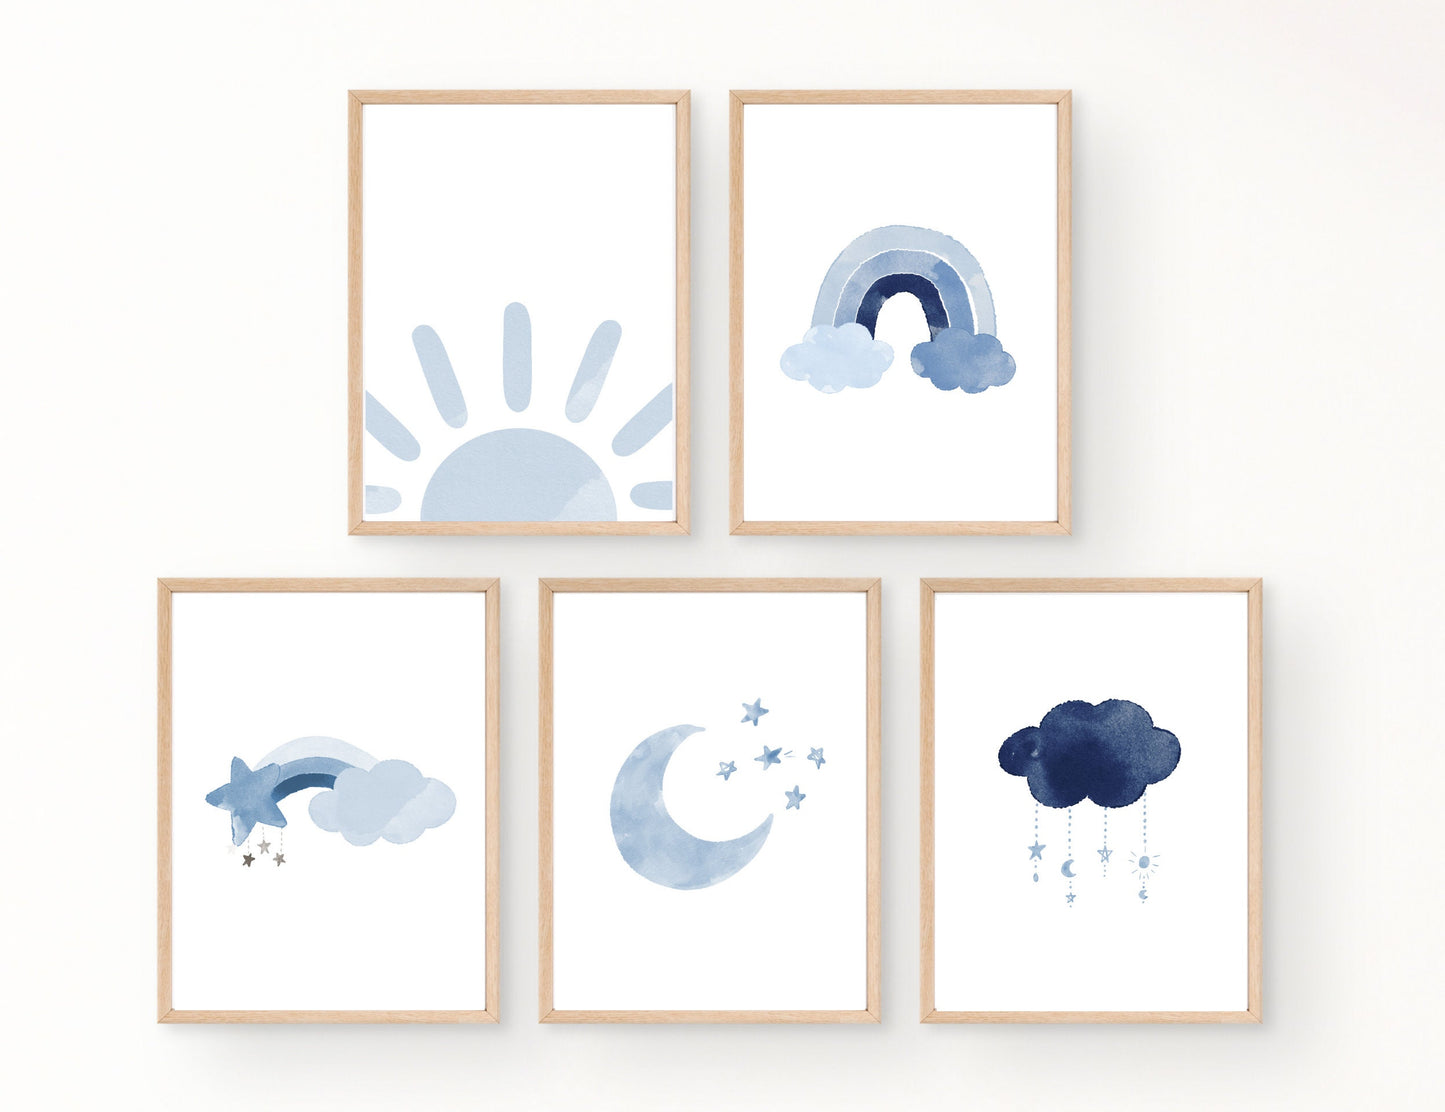 Five frames showing blue graphics. The first one shows a baby blue sun at the base of the frame, the second one shows a rainbow in different shades of blue, the third one shows a blue cloud and a blue star with a rainbow in different shades of blue right behind them. The fourth one shows a blue crescent moon with tiny blue stars right beside it. While the fifth frame shows a dark blue cloud with tiny blue crescent moons and stars dangling from it.